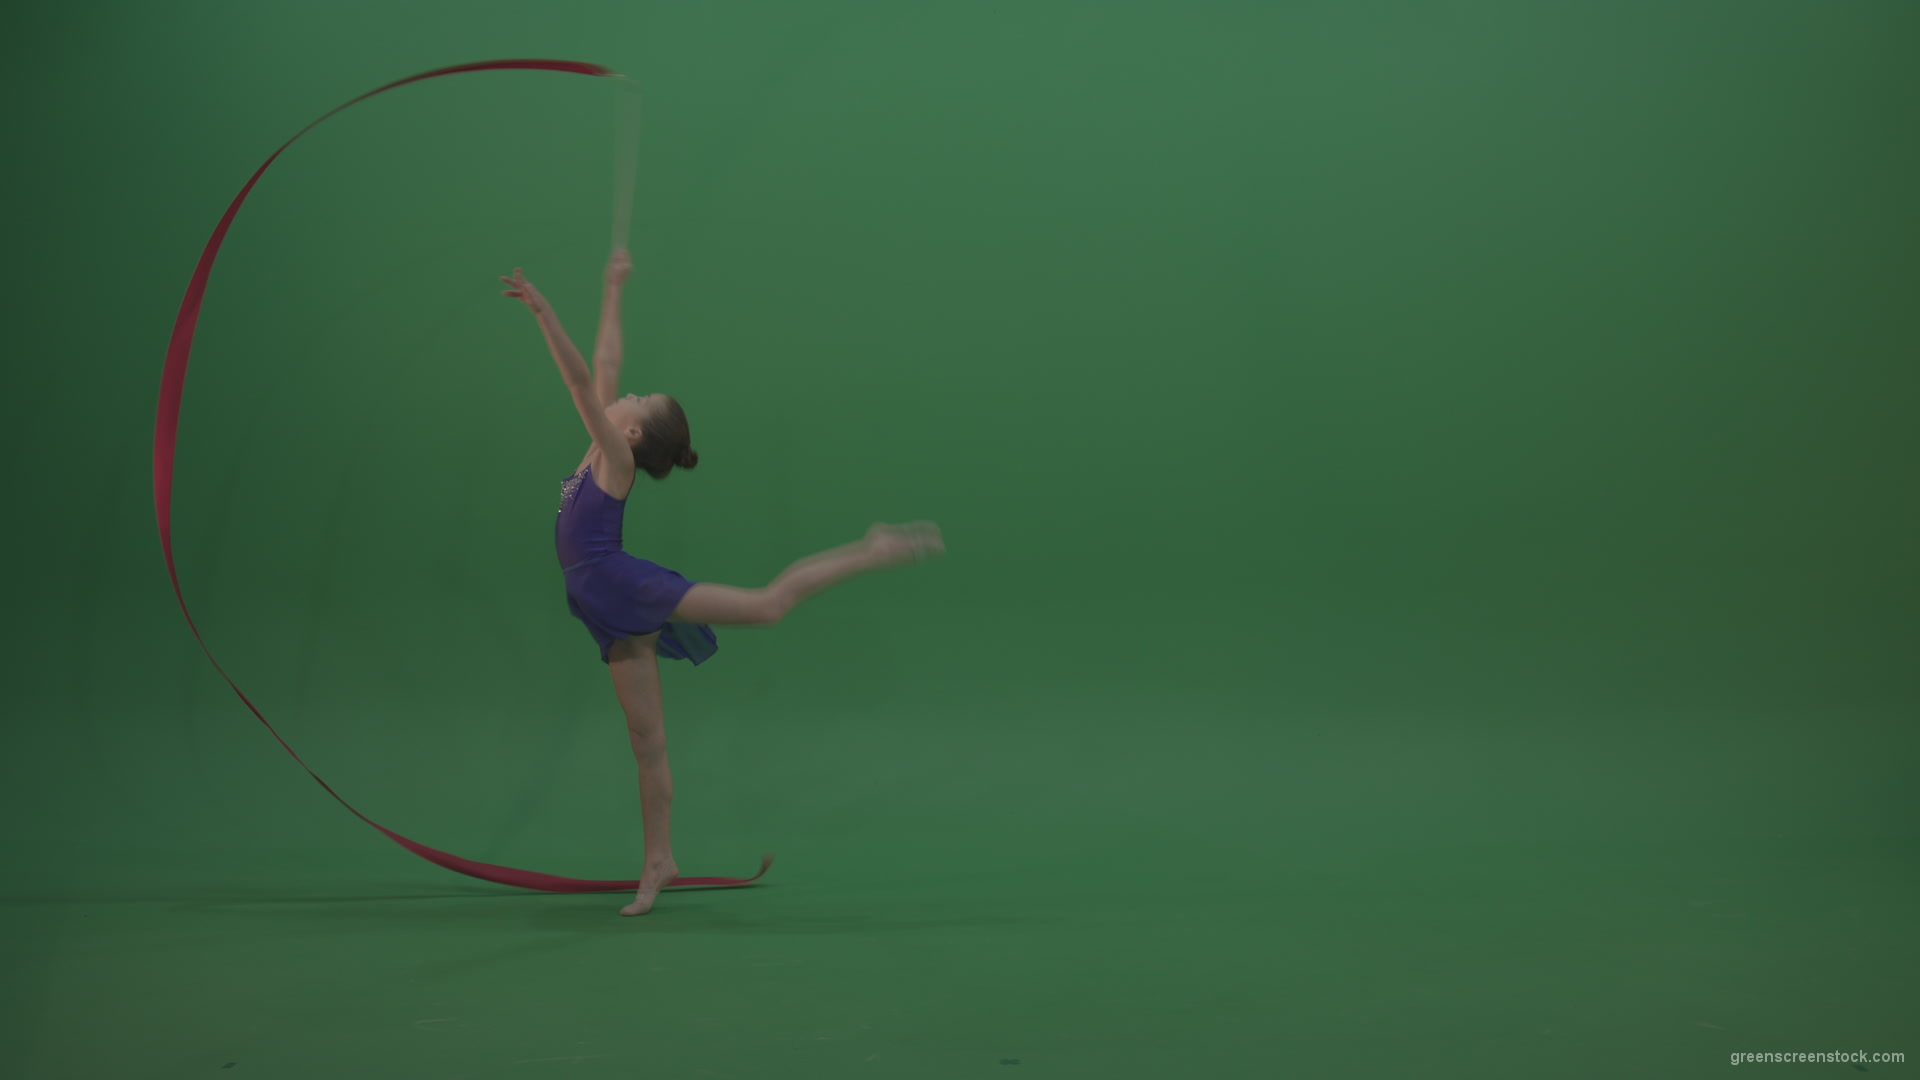 Young_Female_Acrobat_Gymnast_Performing_Acro_Dance_Using_Red_Long_Ribbon_On_Green_Screen_Wall_Chroma_Key_Background_007 Green Screen Stock